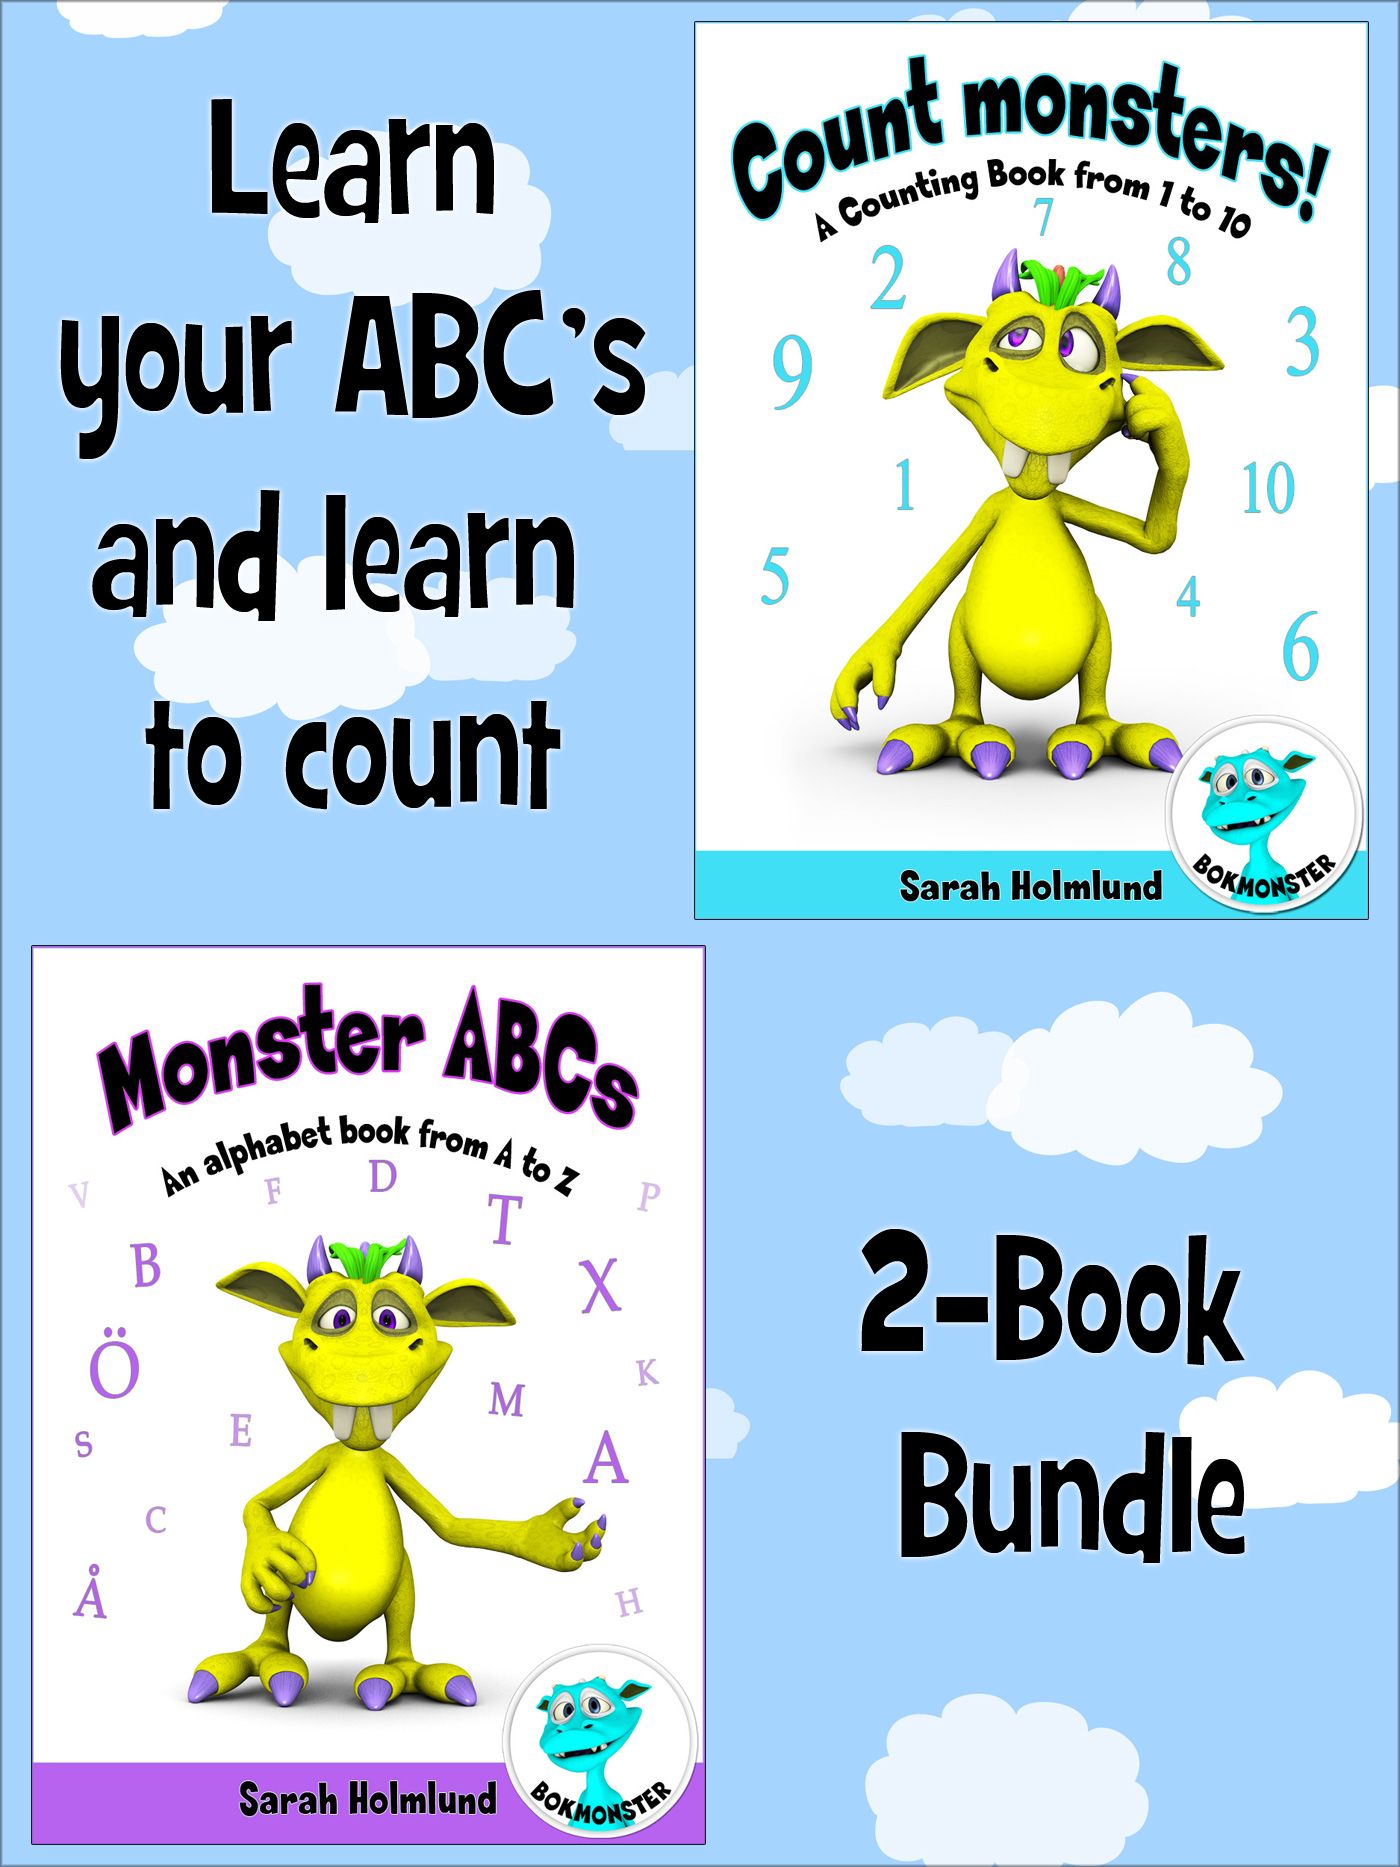 Learn your ABC's and learn to count - 2-Book Bundle, eBook by Sarah Holmlund